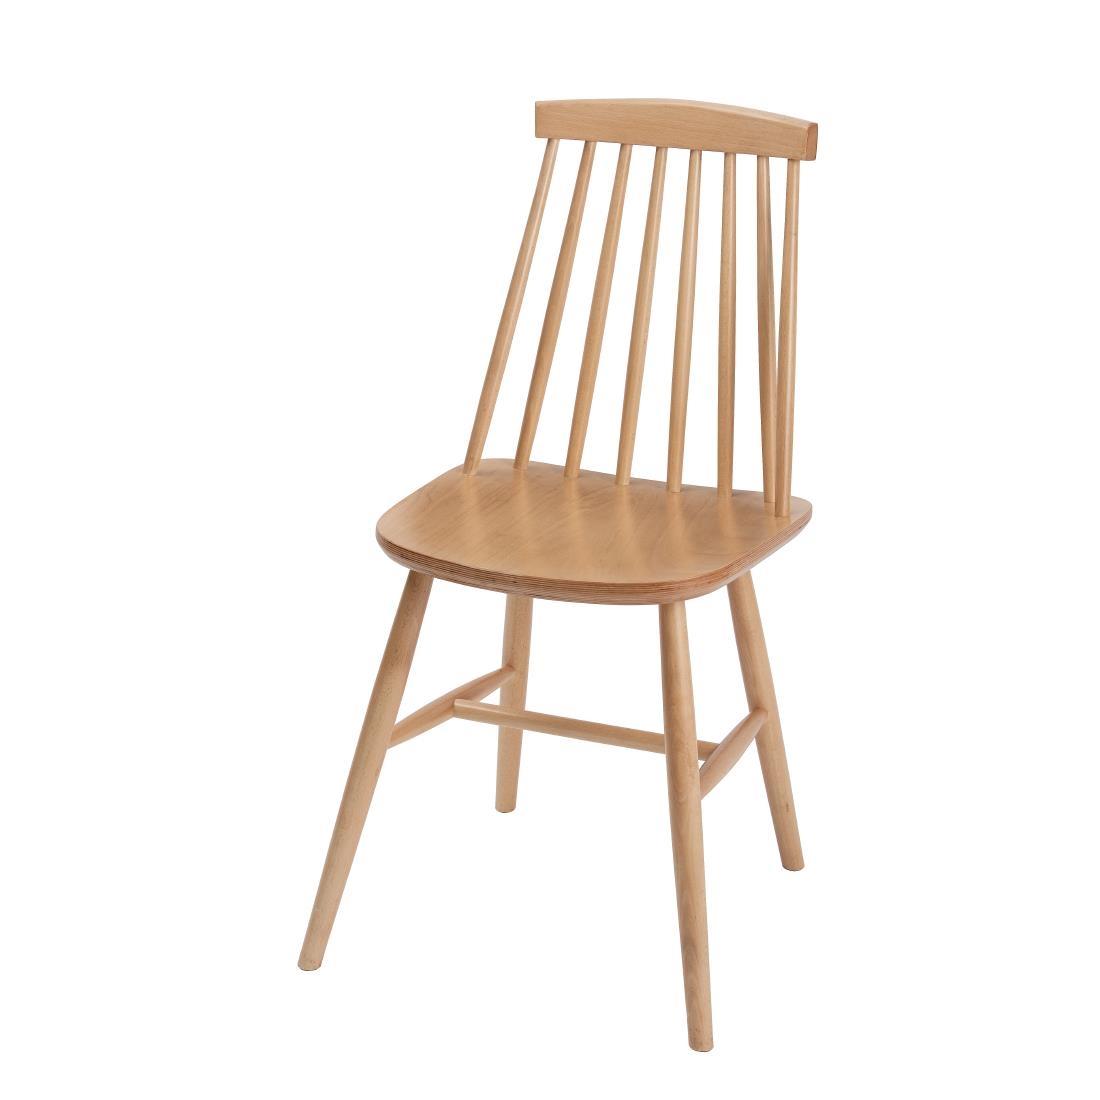 Fameg Farmhouse Angled Side Chairs Natural Beech (Pack of 2) - DC353  - 2